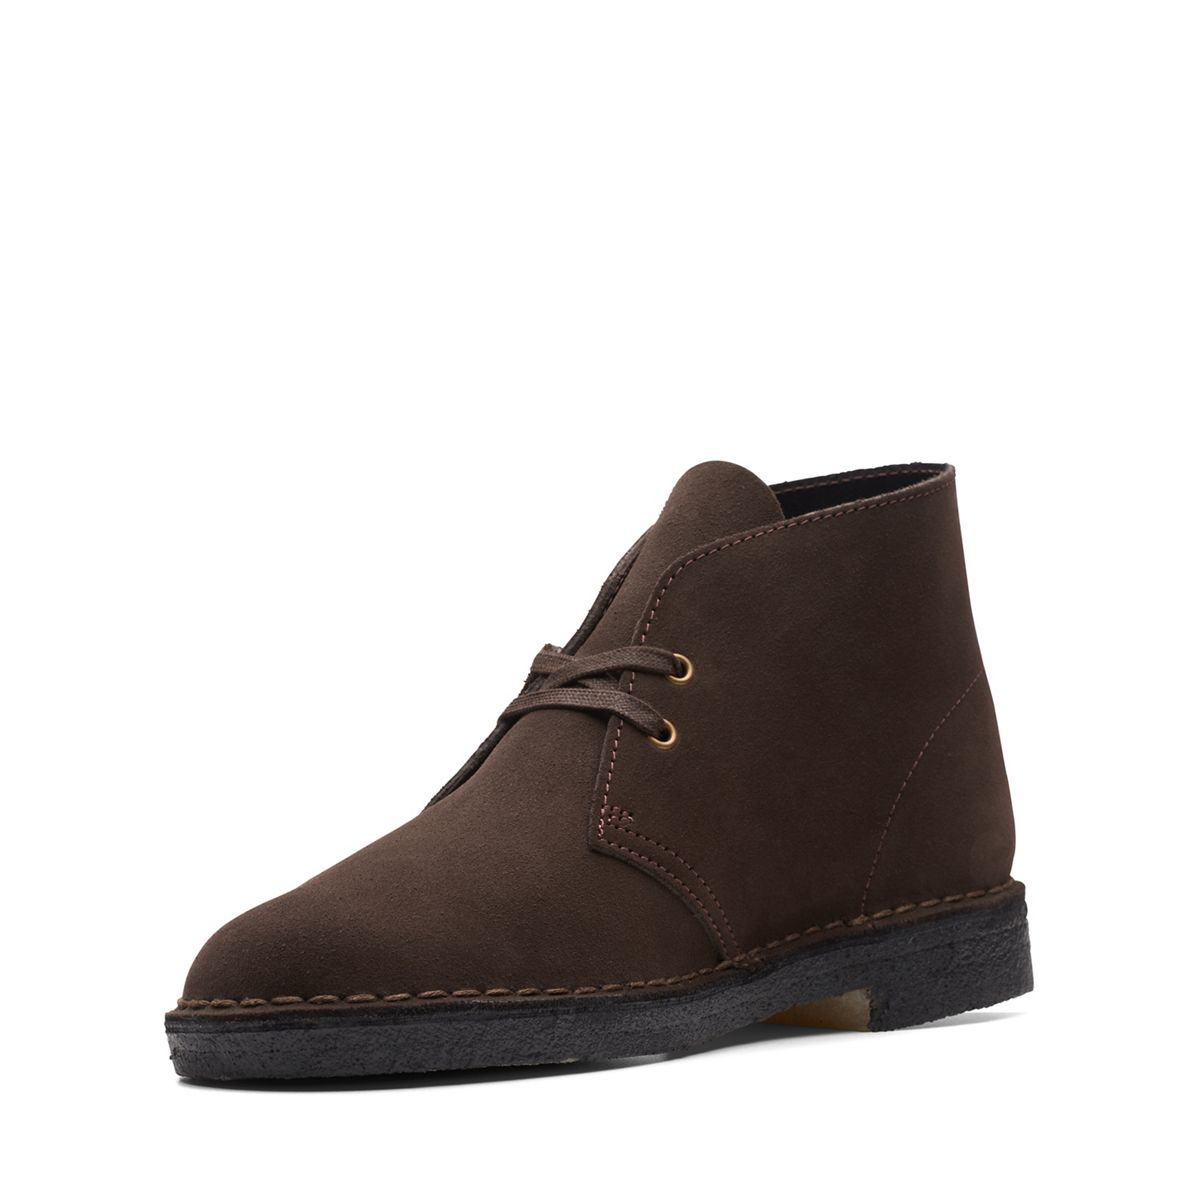 Desert - Clarks Canada Official Site | Clarks Shoes